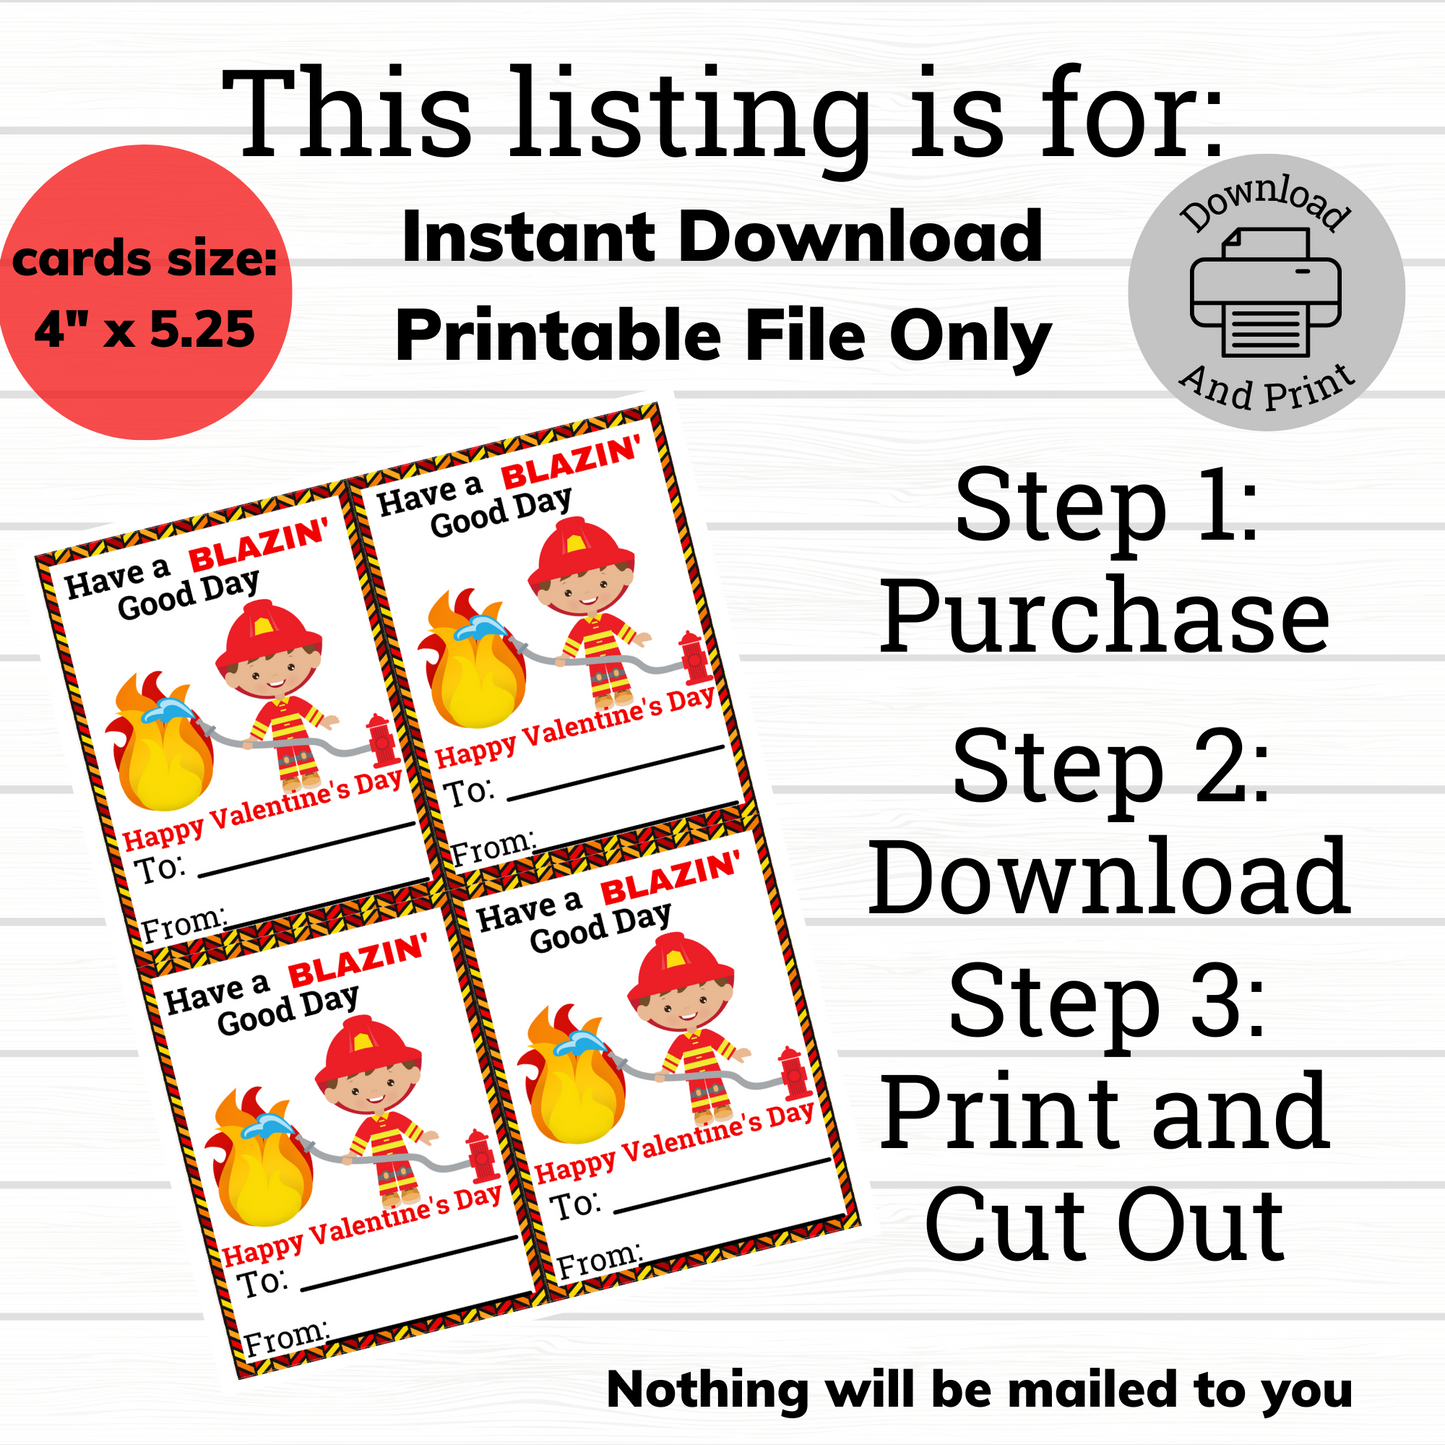 Steps on how to use Firefighter Valentine card printable Have a blazin good day 